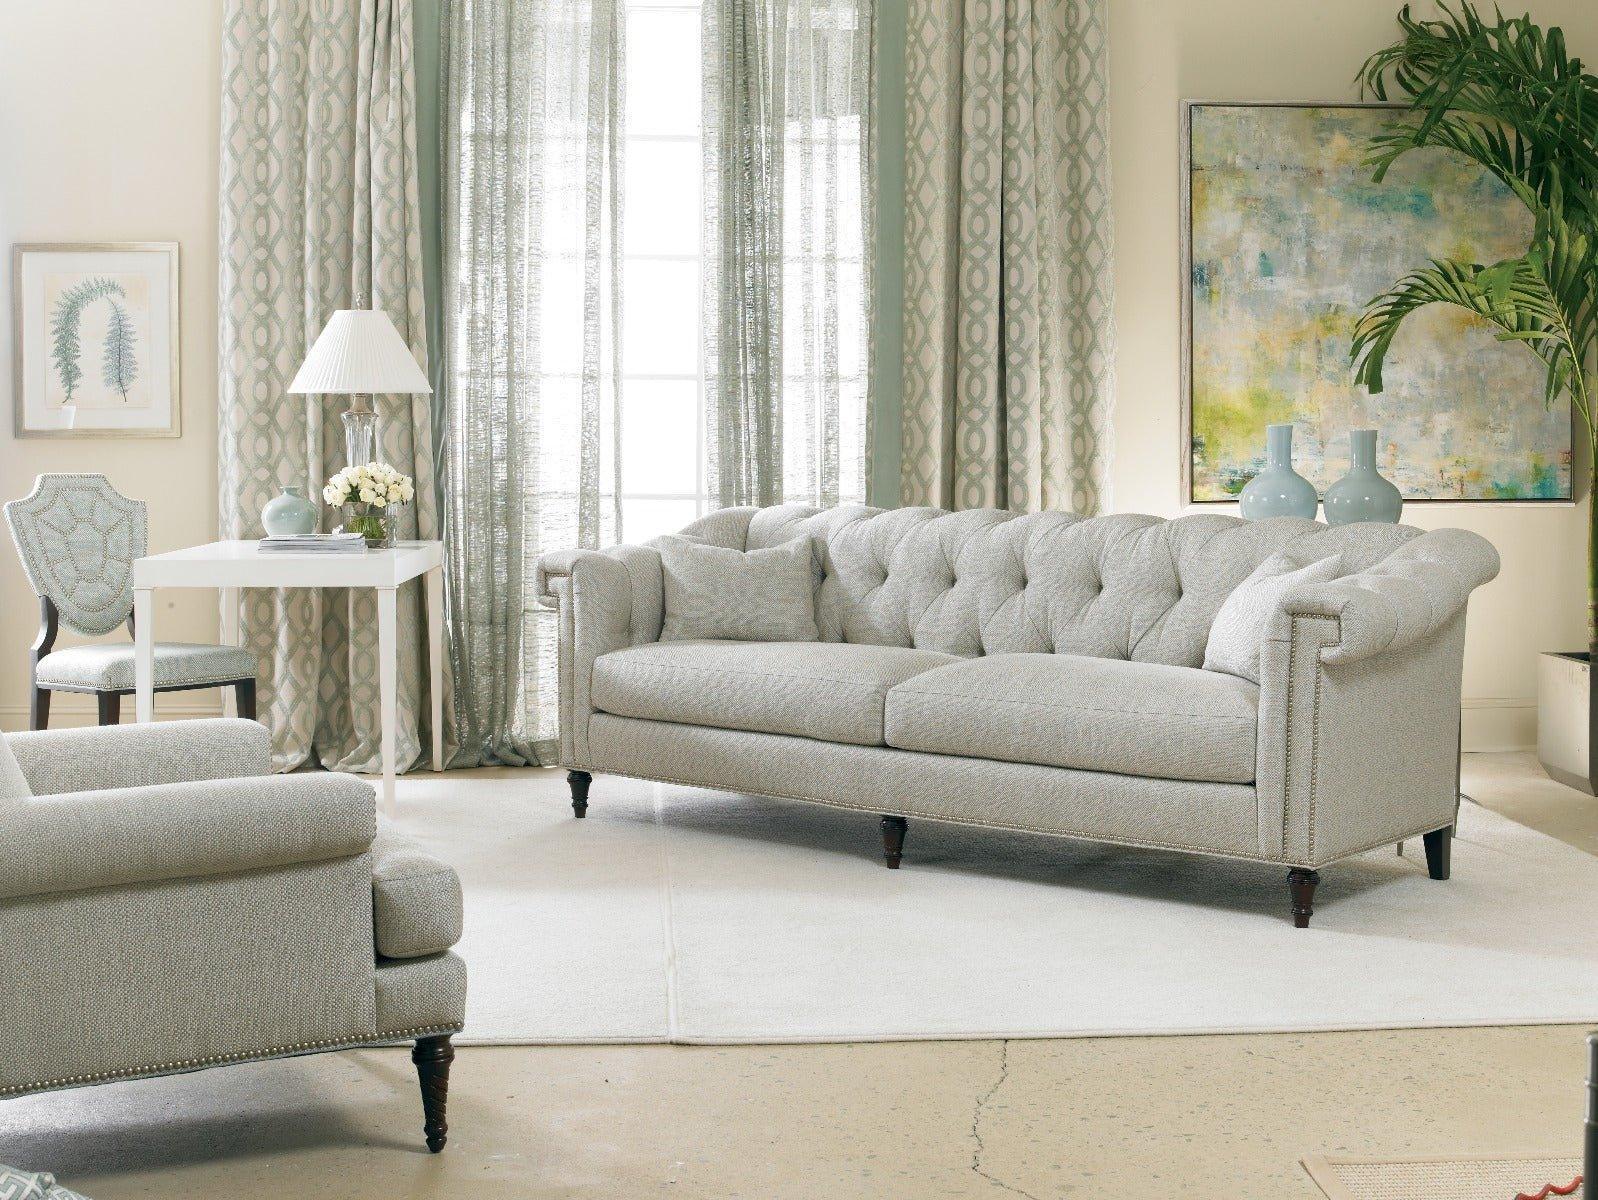 https://www.wellappointedhouse.com/cdn/shop/files/hand-tufted-back-and-arms-upholstered-two-seat-cushion-sofa-with-nailhead-detail-sofas-and-settees-the-well-appointed-house-5_b72c784e-b796-4563-b902-5d0dc76161c9.jpg?v=1691670966